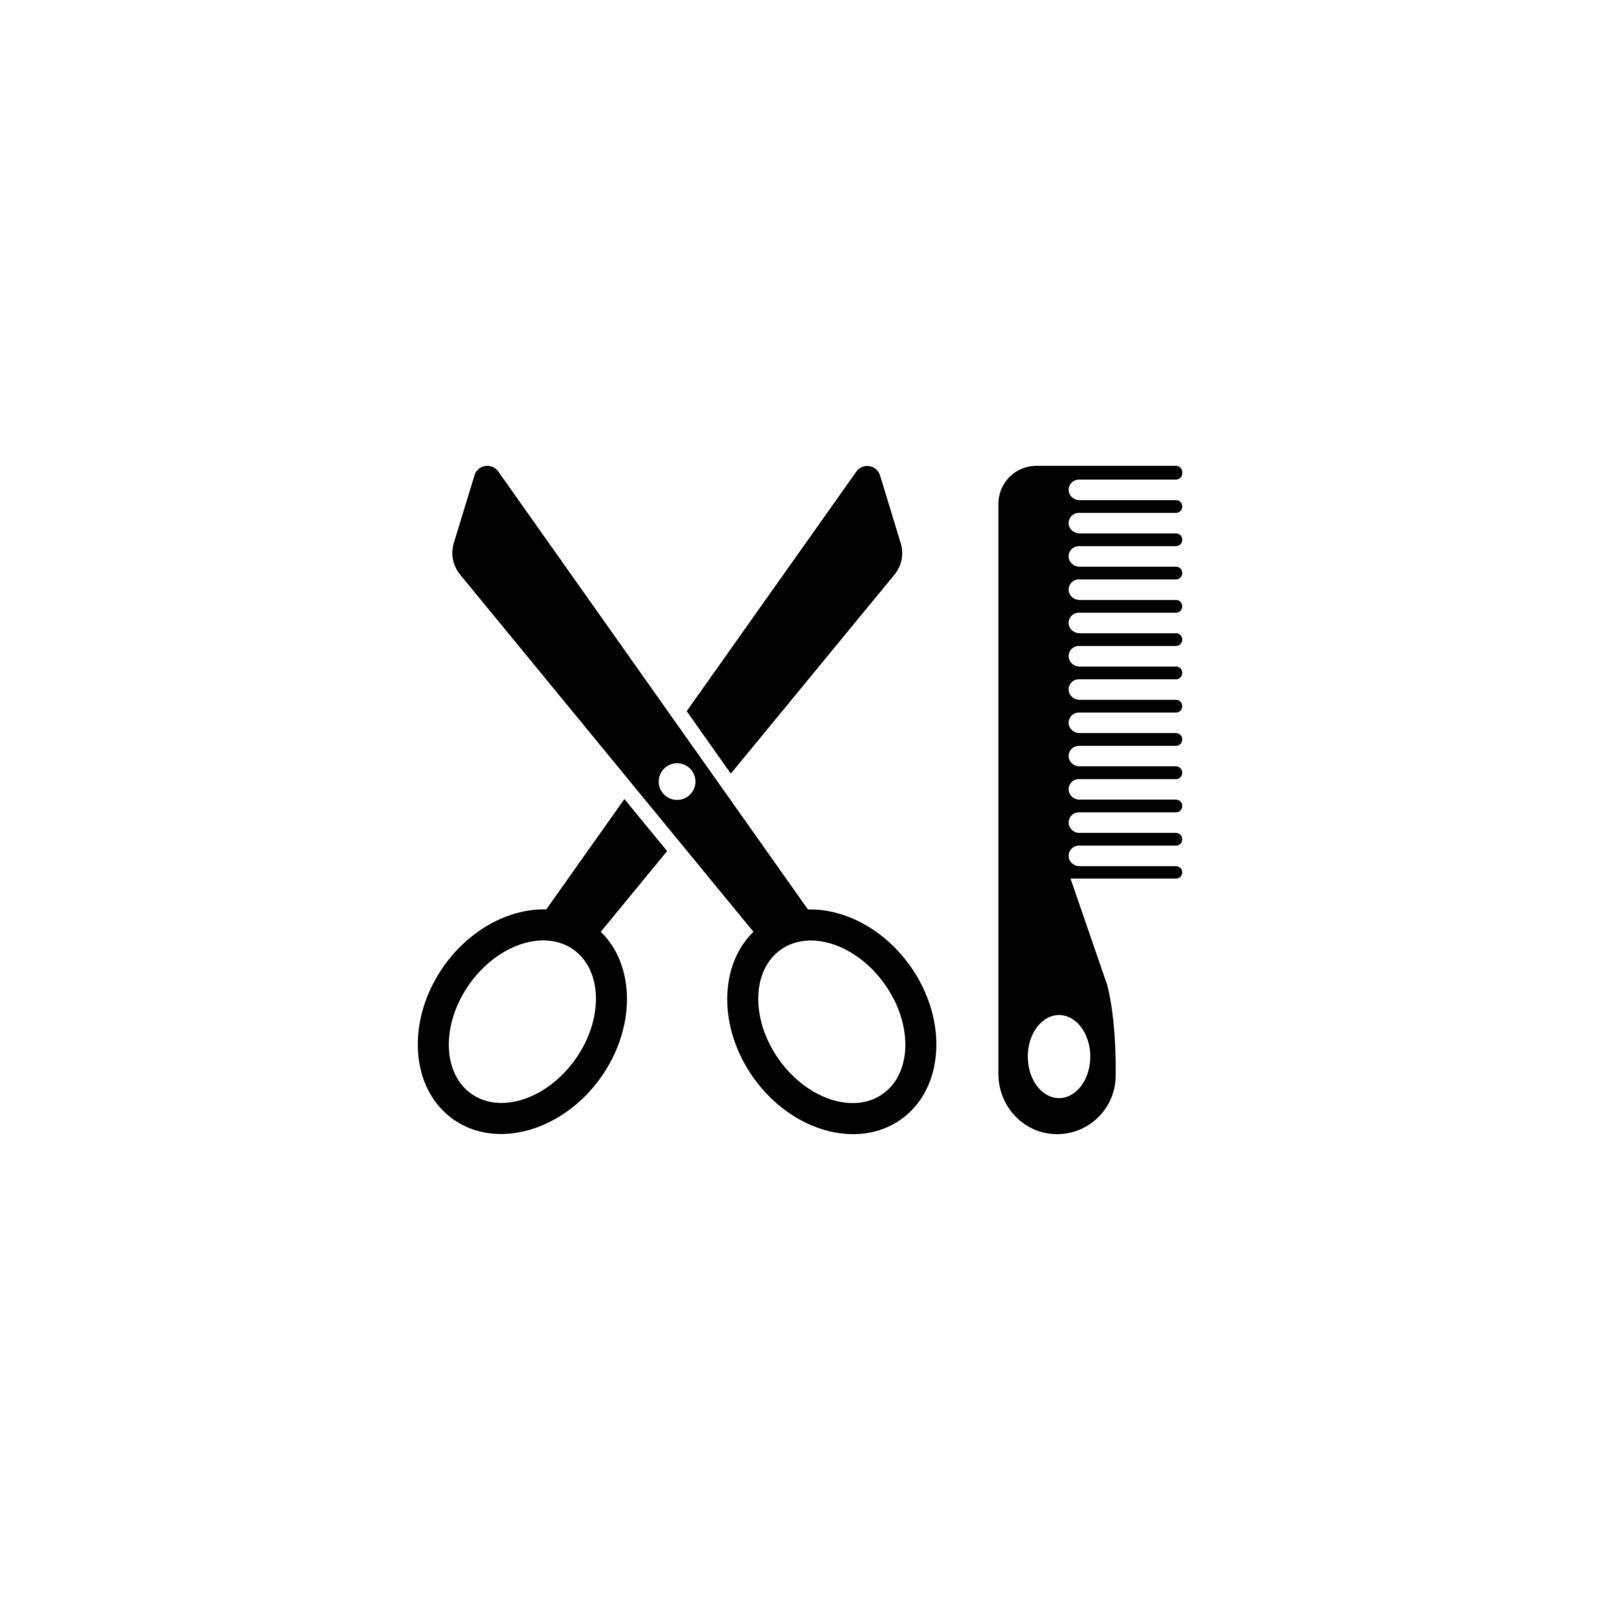 Scissors and Comb, Hairdresser Tools. Flat Vector Icon illustration. Simple black symbol on white background. Scissors and Comb, Hairdresser Tools sign design template for web and mobile UI element. by sfinks